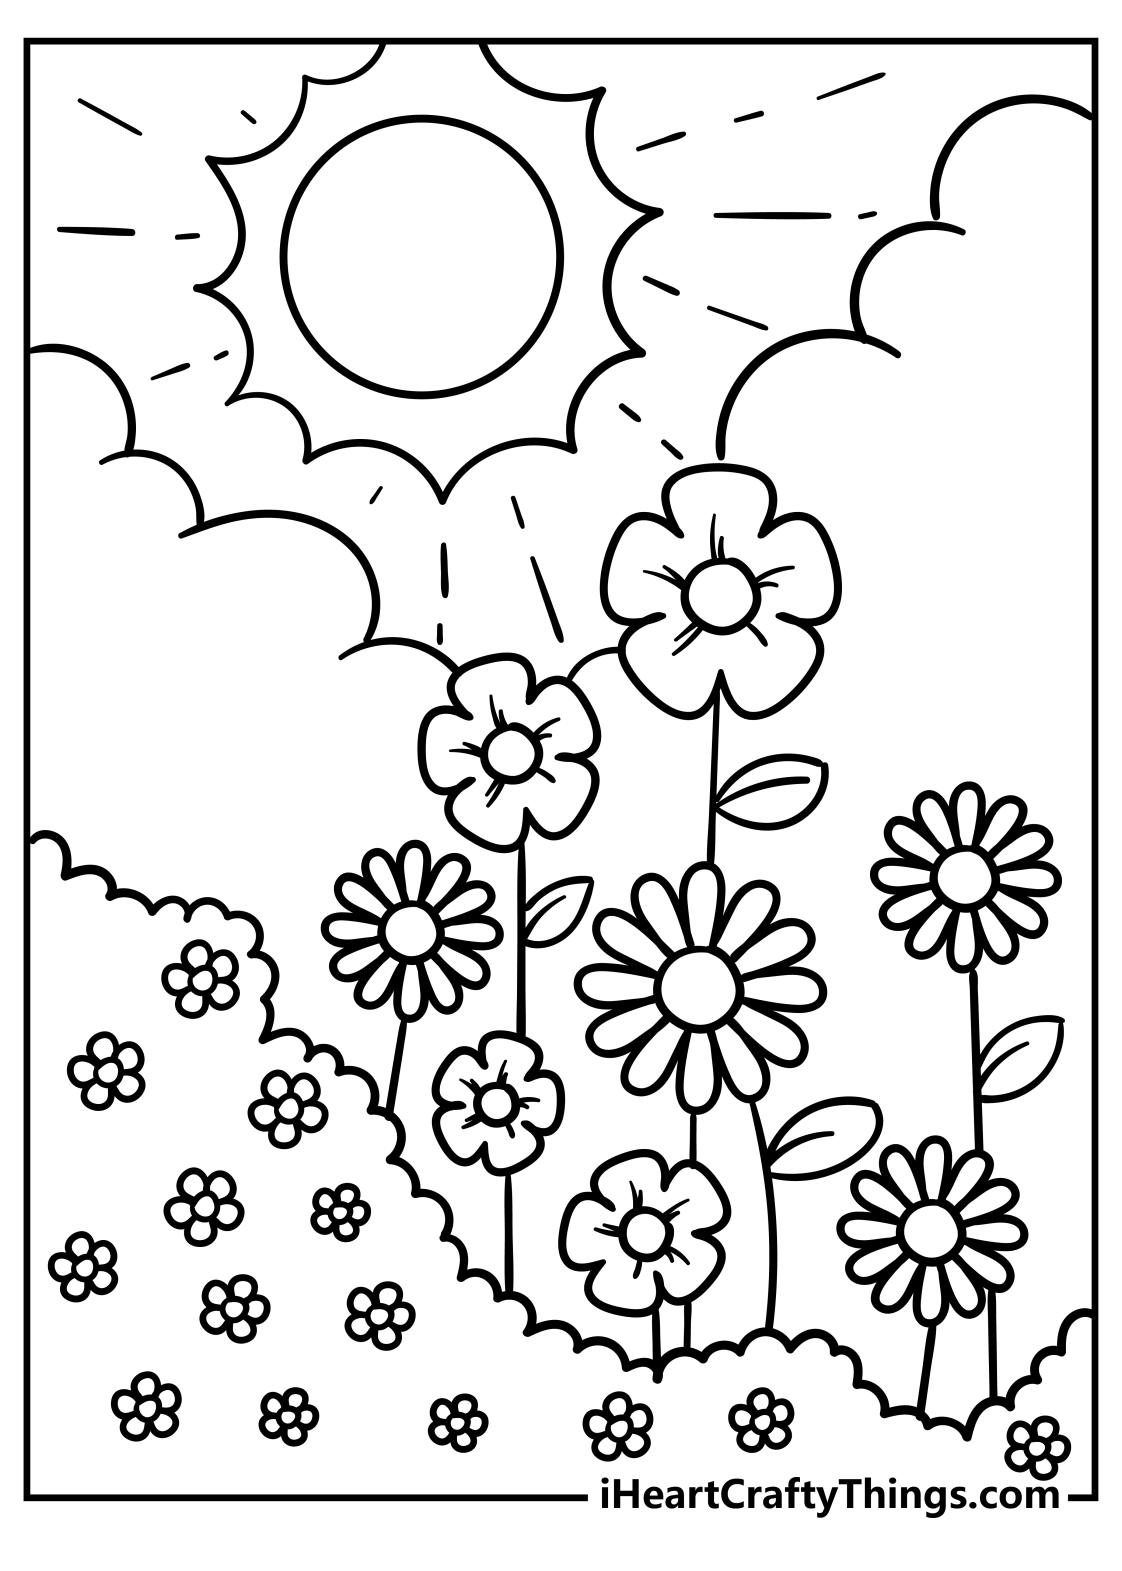 flower-garden-coloring-pages-printable-for-adults-coloring-pages